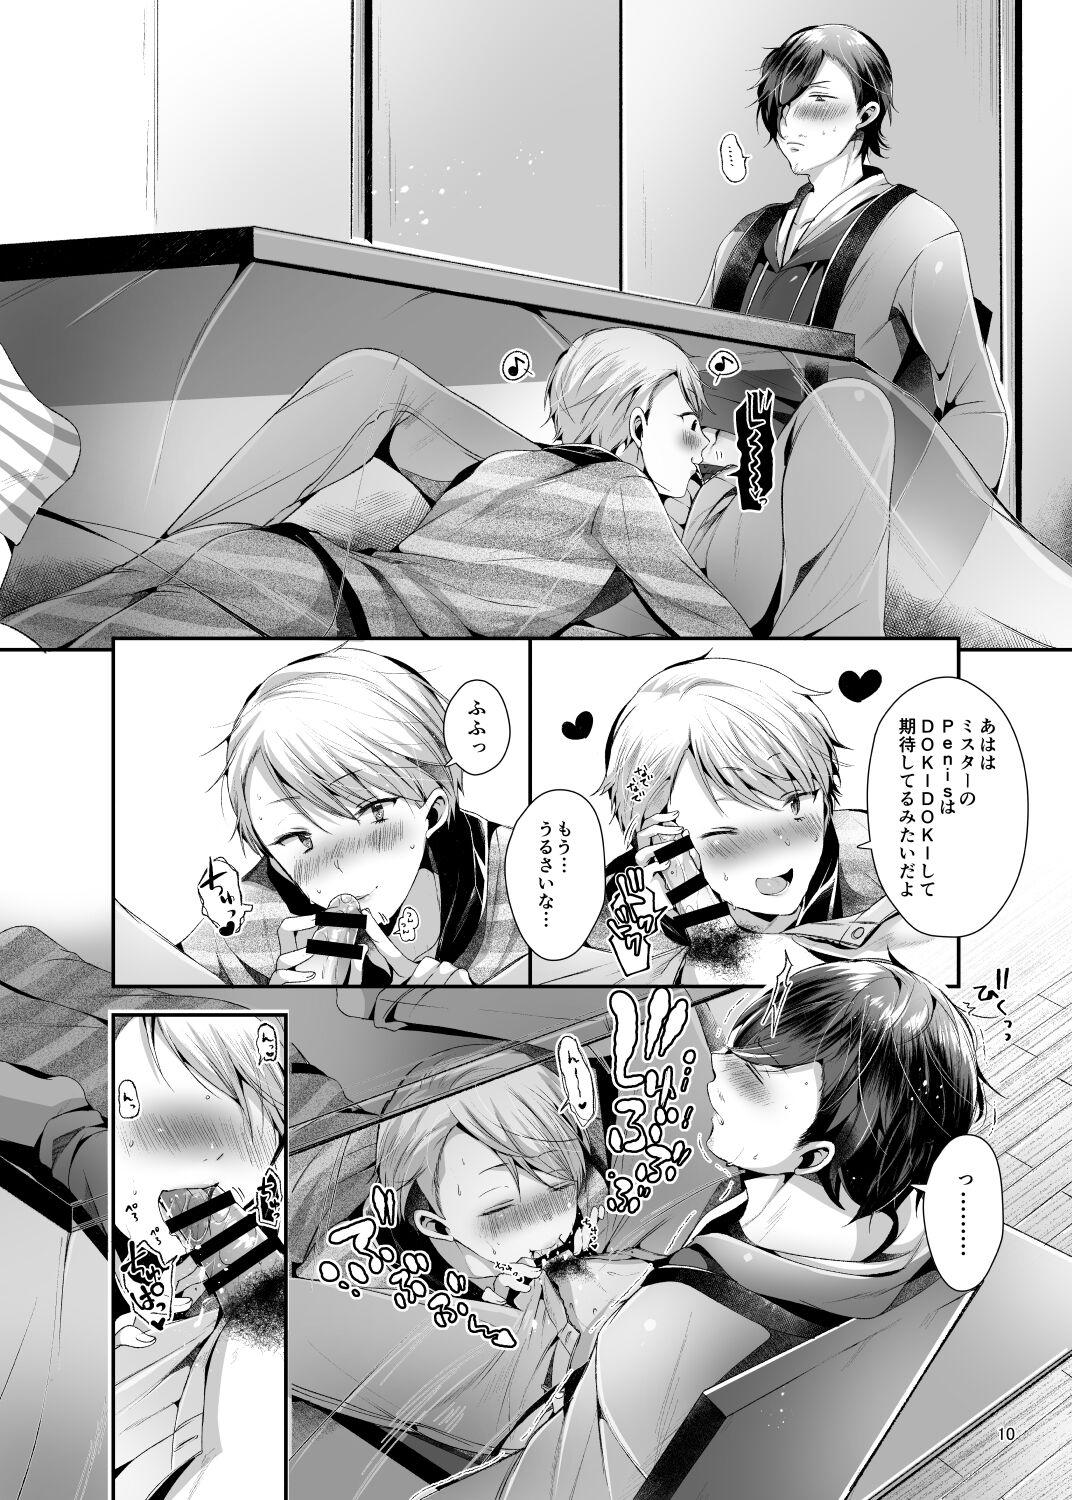 Best Blowjob Relax at home - The idolmaster sidem Mama - Page 11